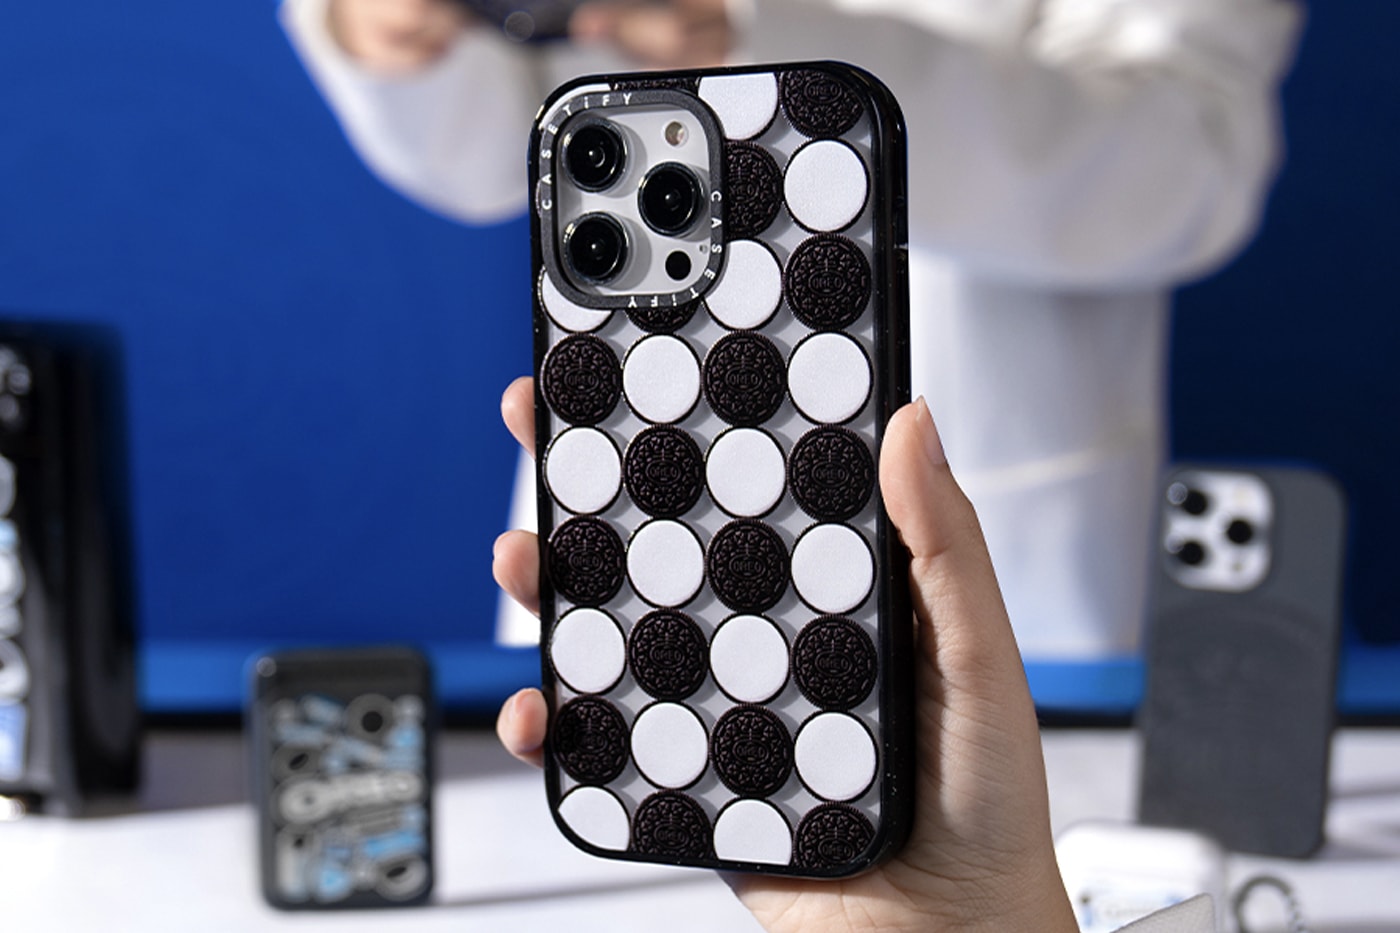 CASETiFY Launches Oreo Accessories Collaboration apple iphone apple airpods case android google phone case milks favorite cookie phone case durable